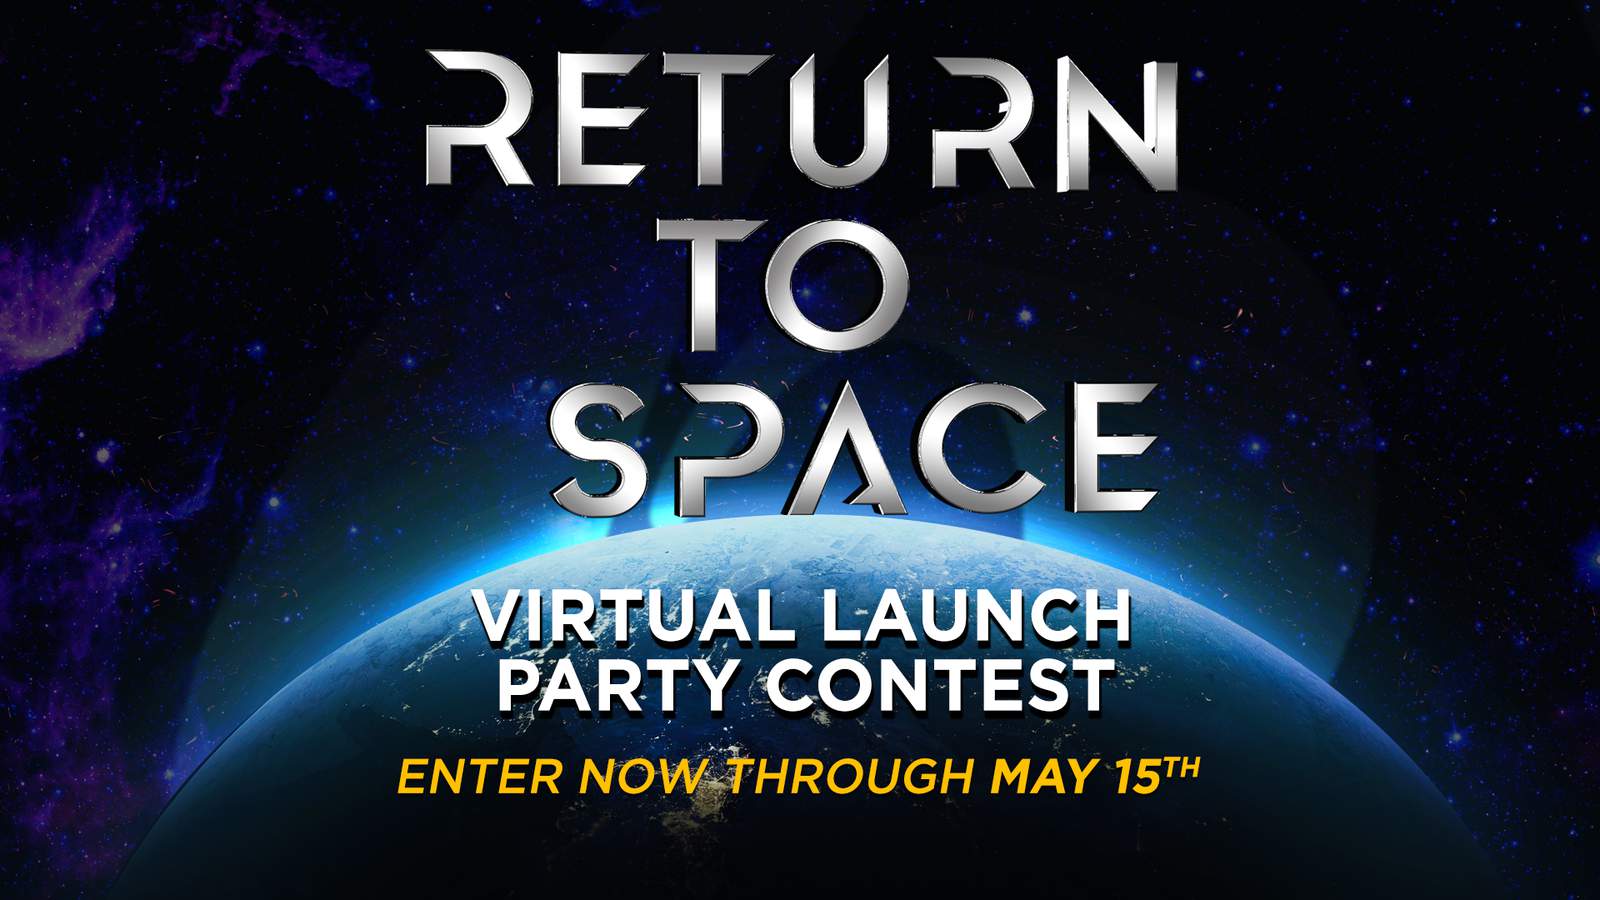 Return to Space Virtual Launch Party Contest Official Rules